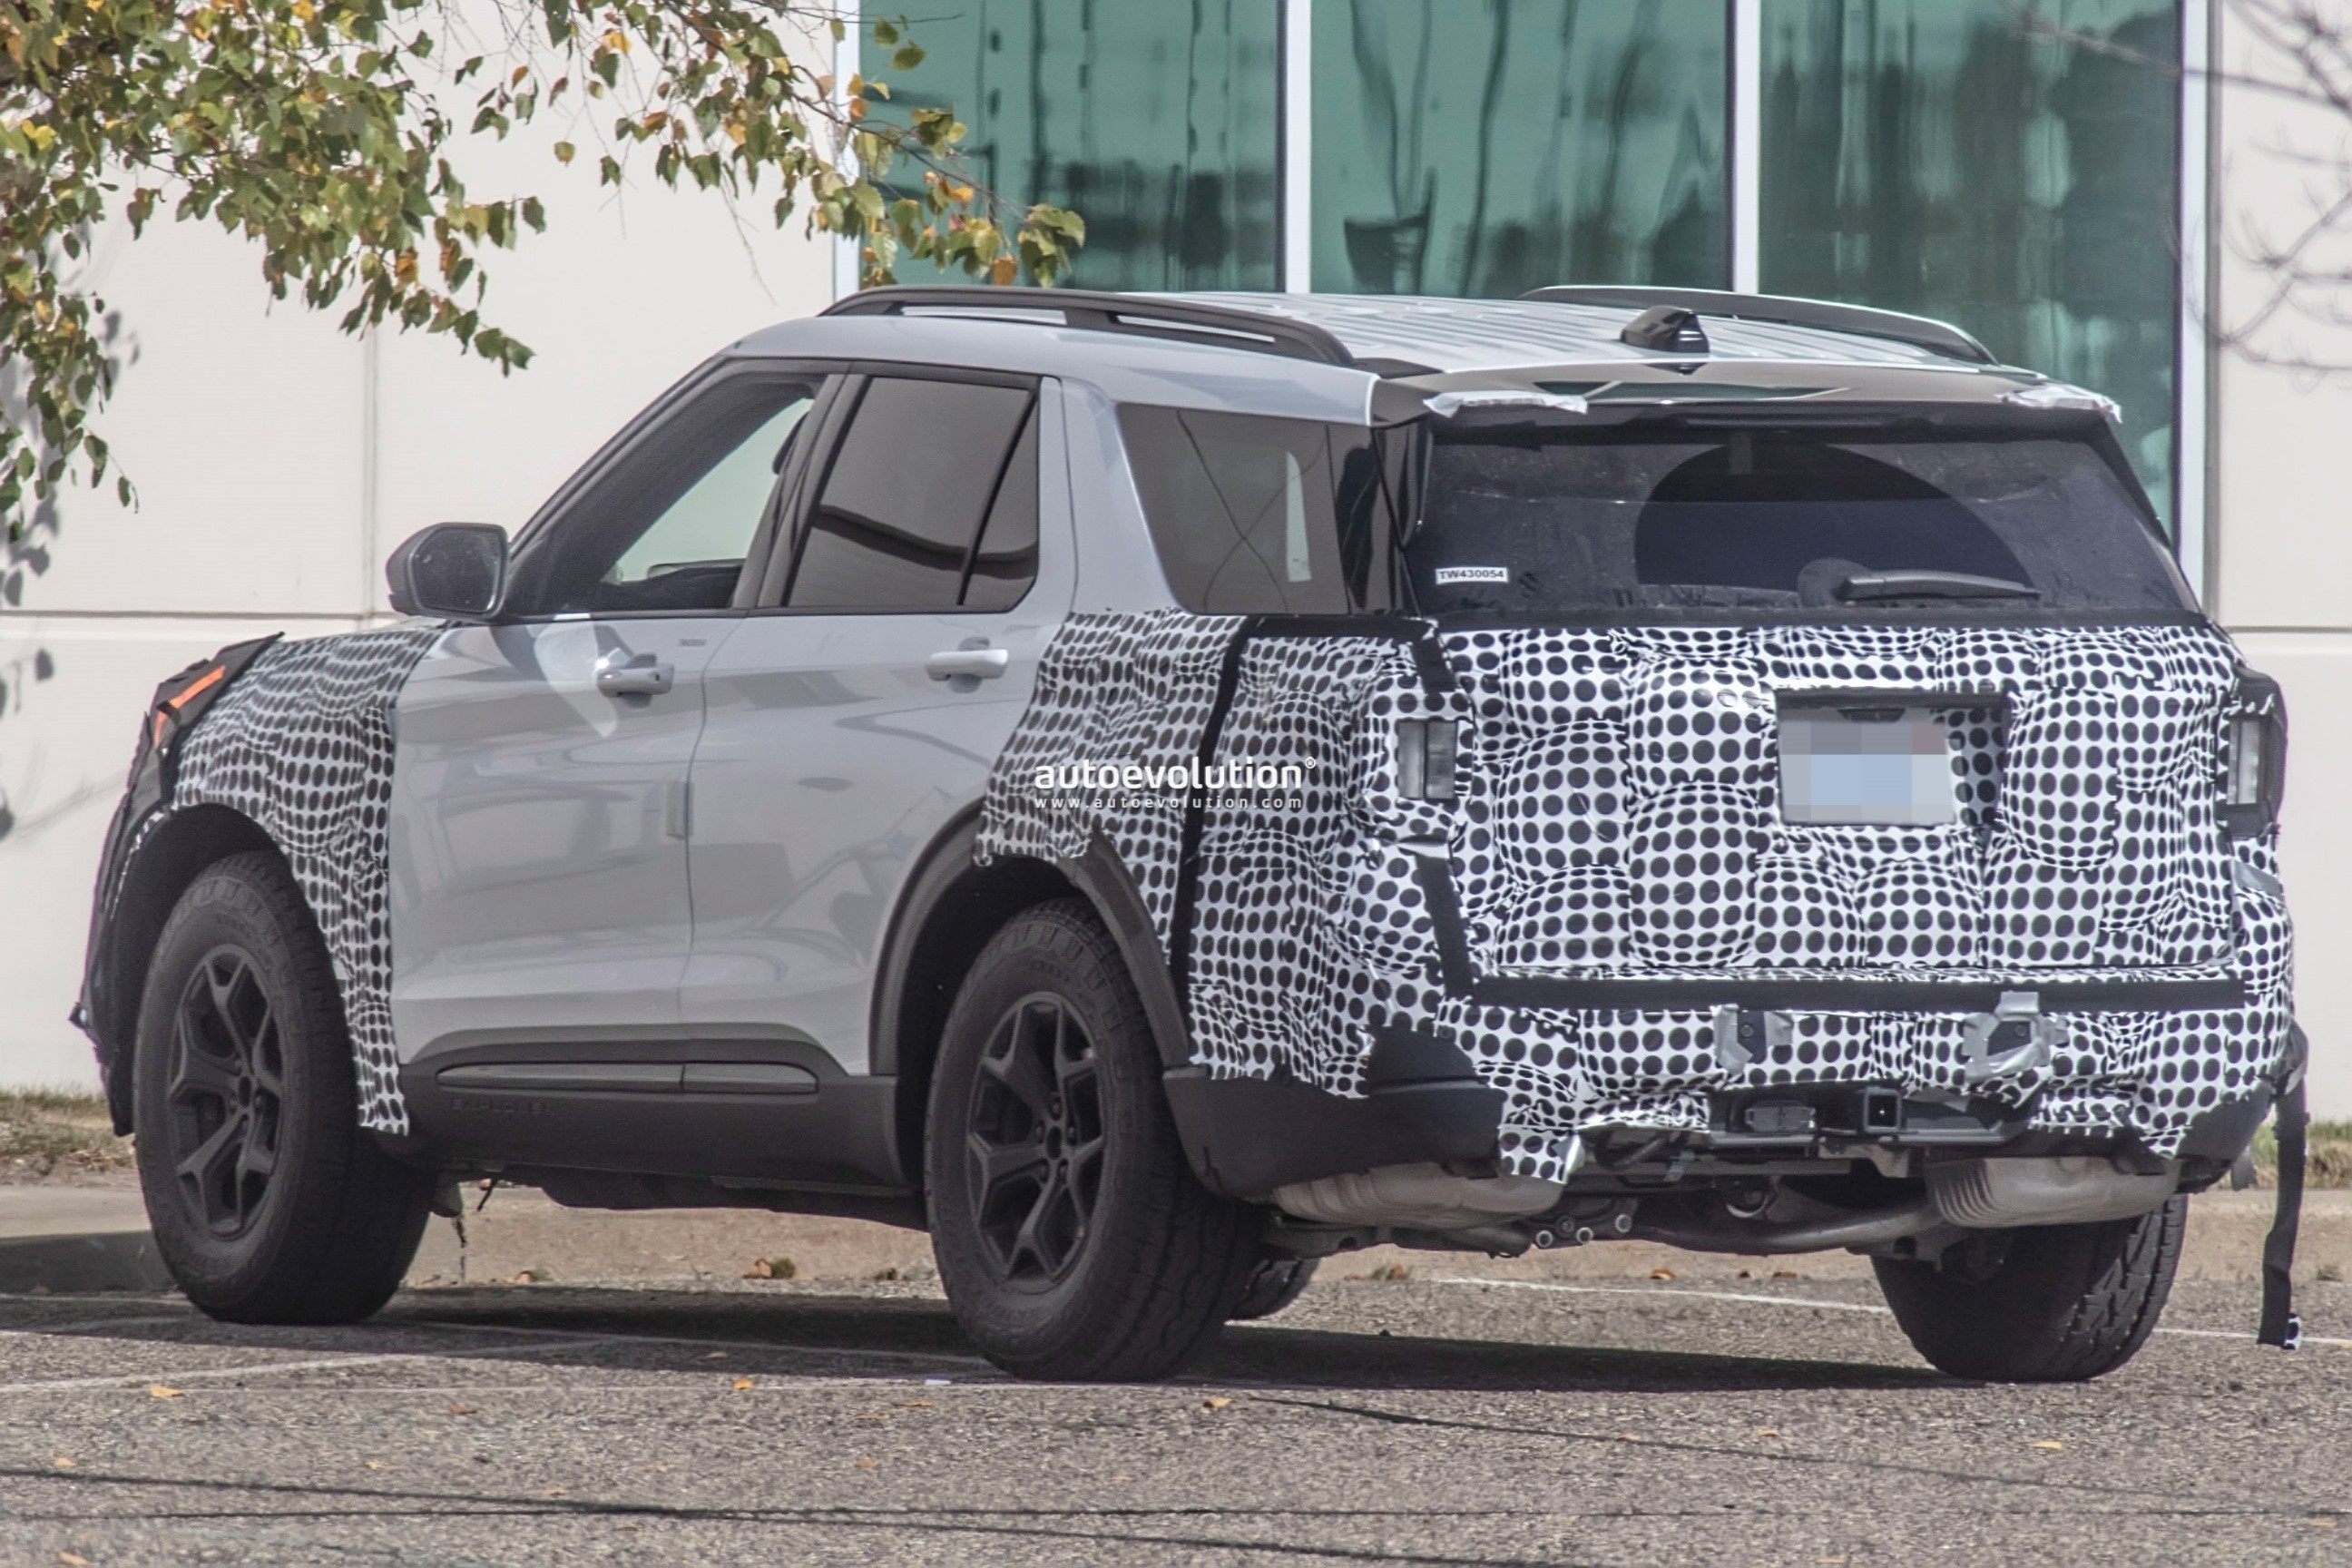 2024-ford-explorer-shows-new-infotainment-and-instrument-cluster-in-latest-spy-pics-autoevolution